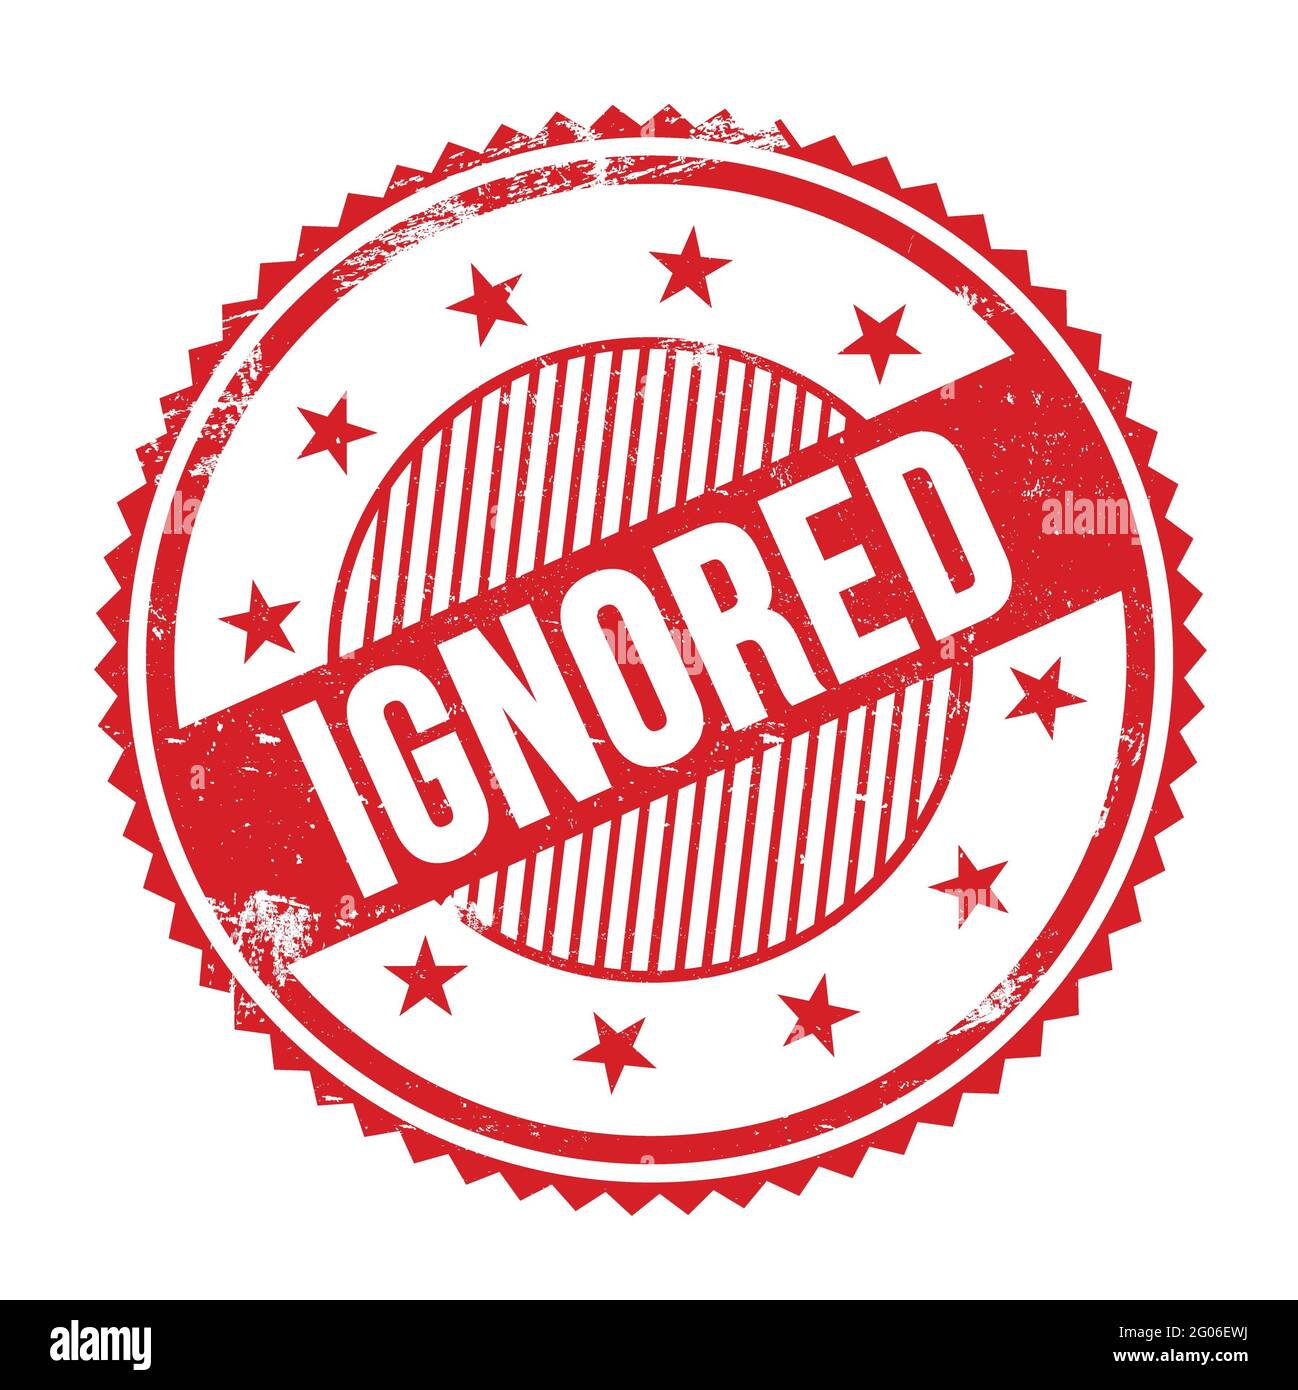 IGNORED text written on red grungy zig zag borders round stamp. Stock Photo